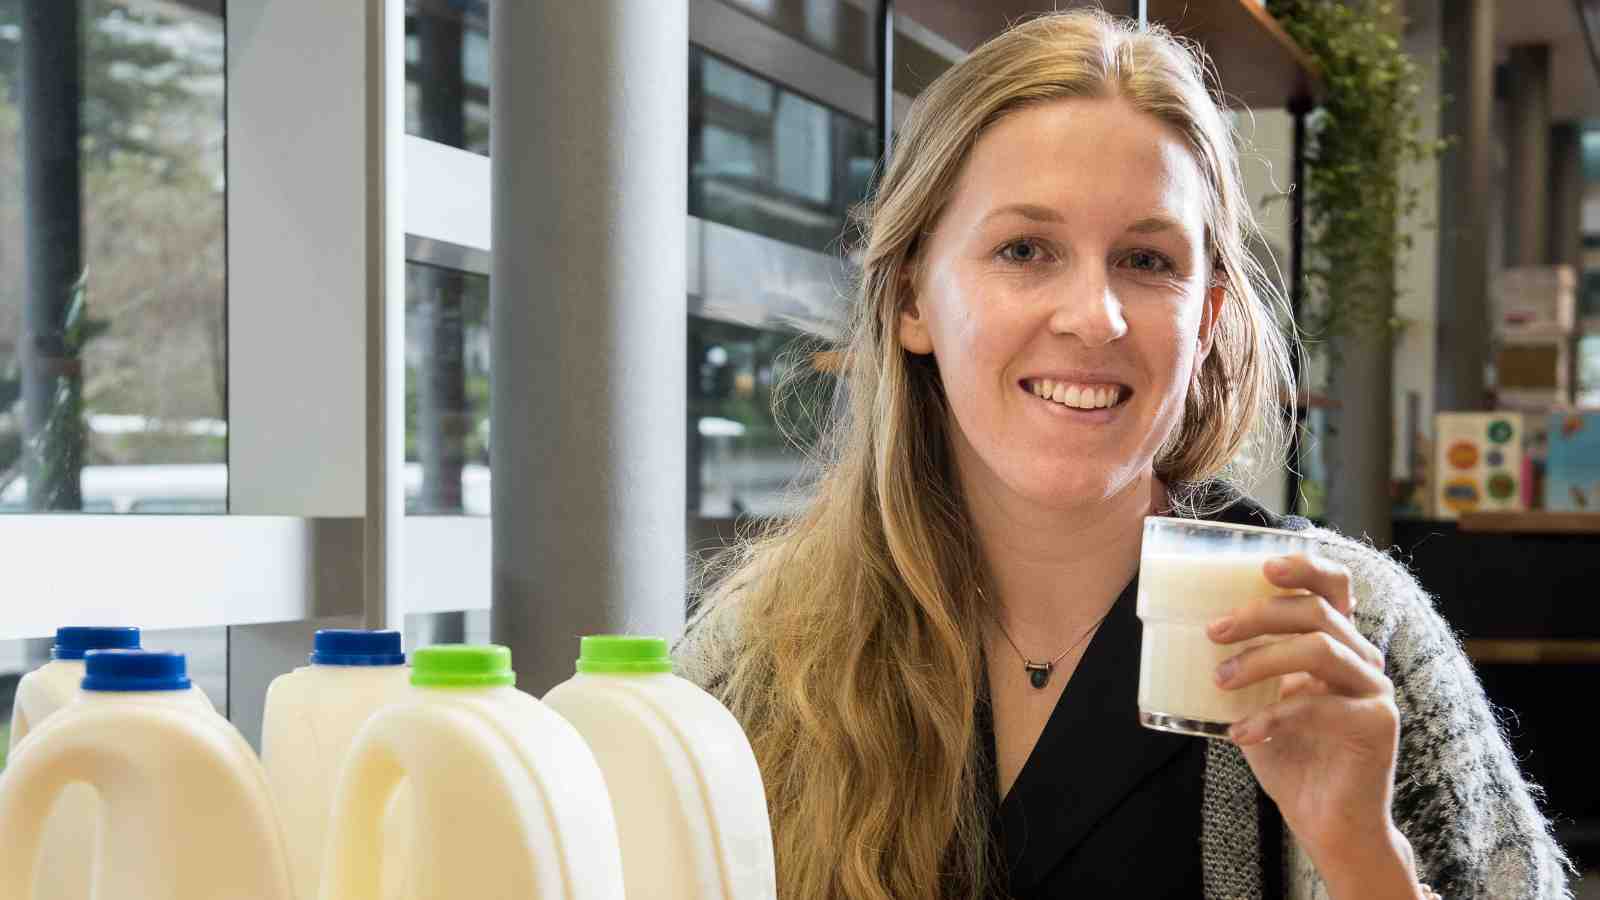 Victoria Business School student Rebecca Matthews wins national accounting 'Cash Cow' competition